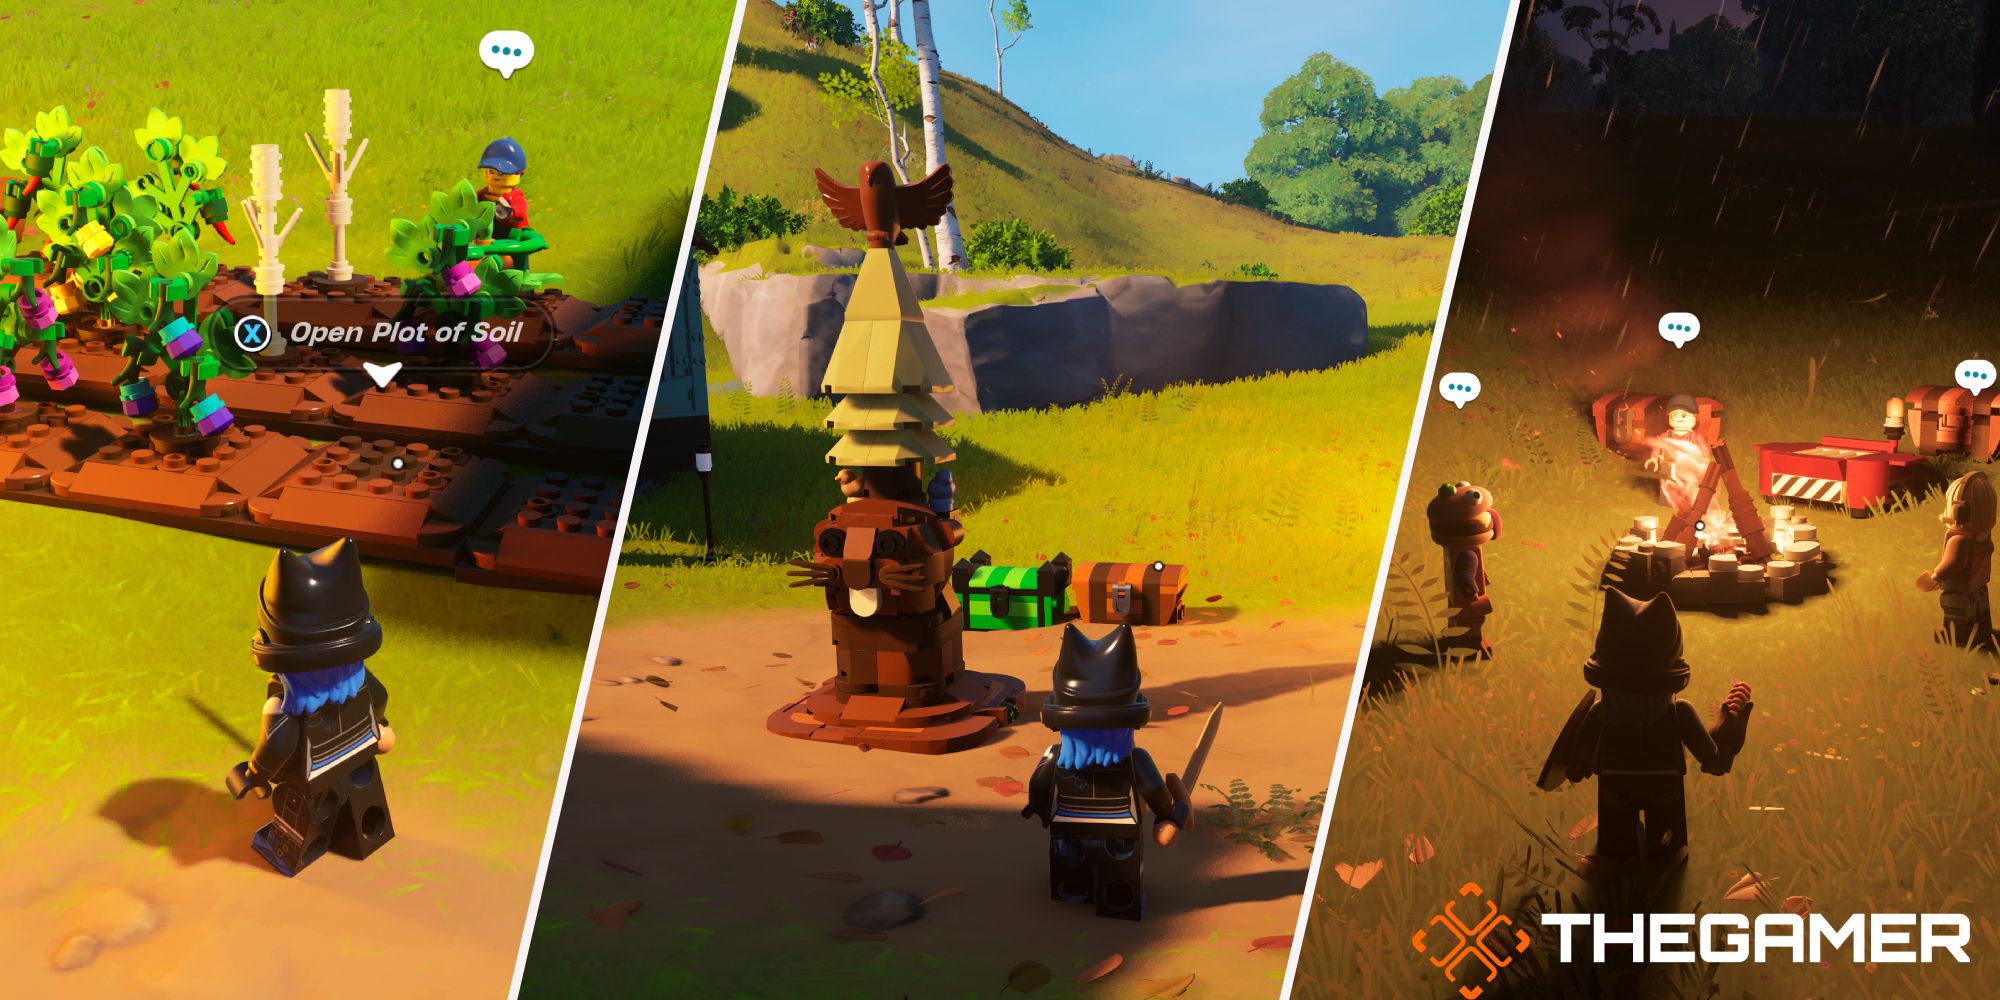 Lego Fortnite: Left: Crop plots, Middle: standing by upgrade podium, right: at campfire with villagers